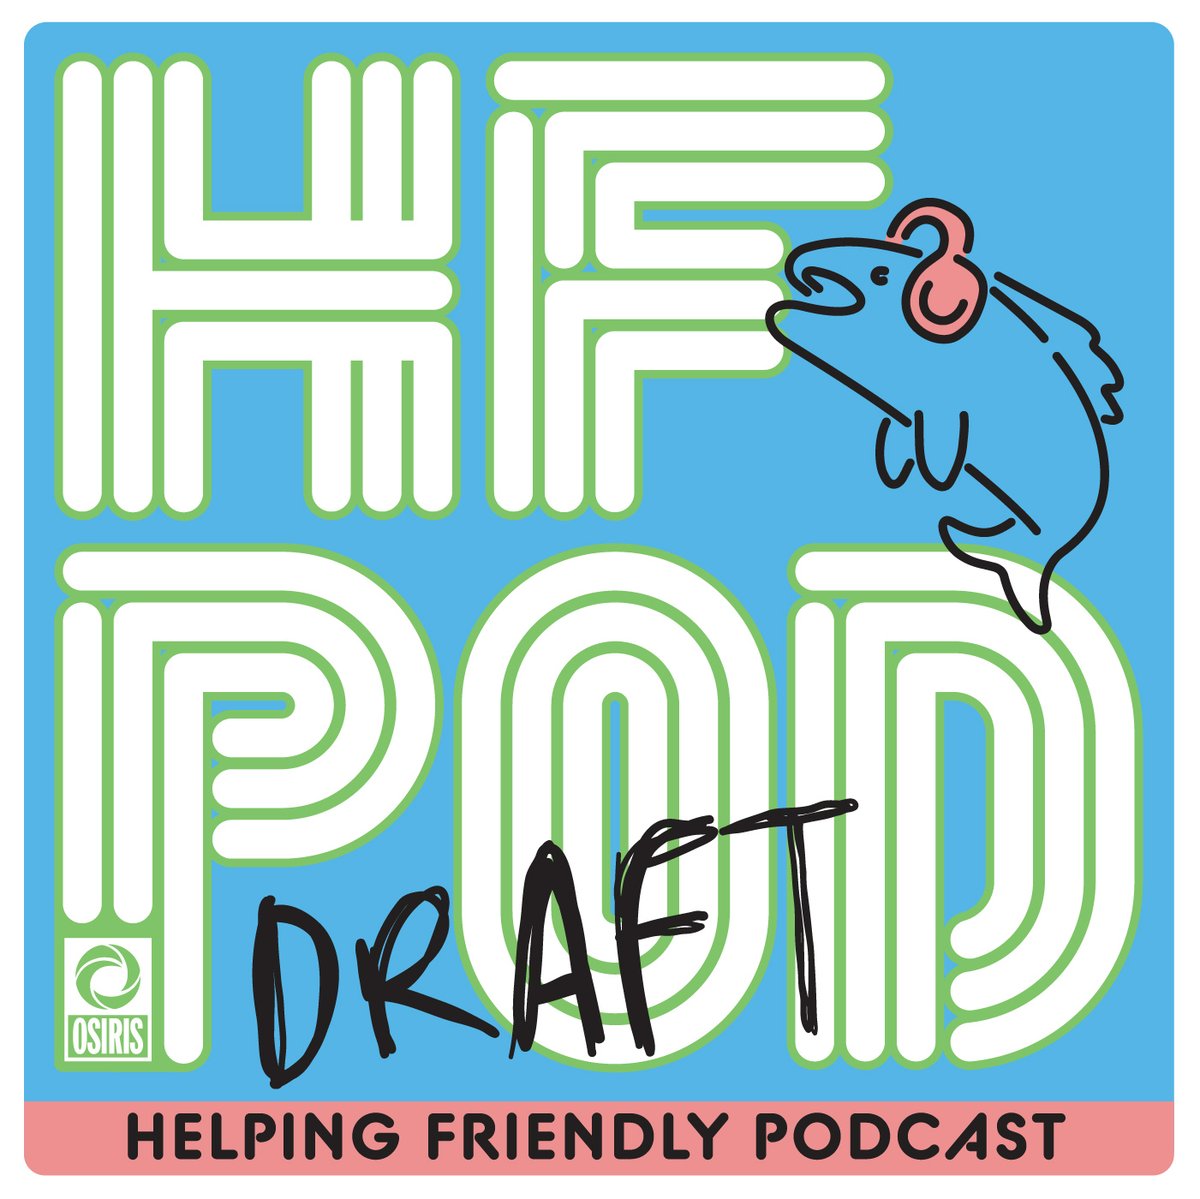 Last day to vote on who won the @hfpod TWEEZER draft. We will announce winner on next episode (Saturday 11:15am ET) docs.google.com/forms/d/e/1FAI…